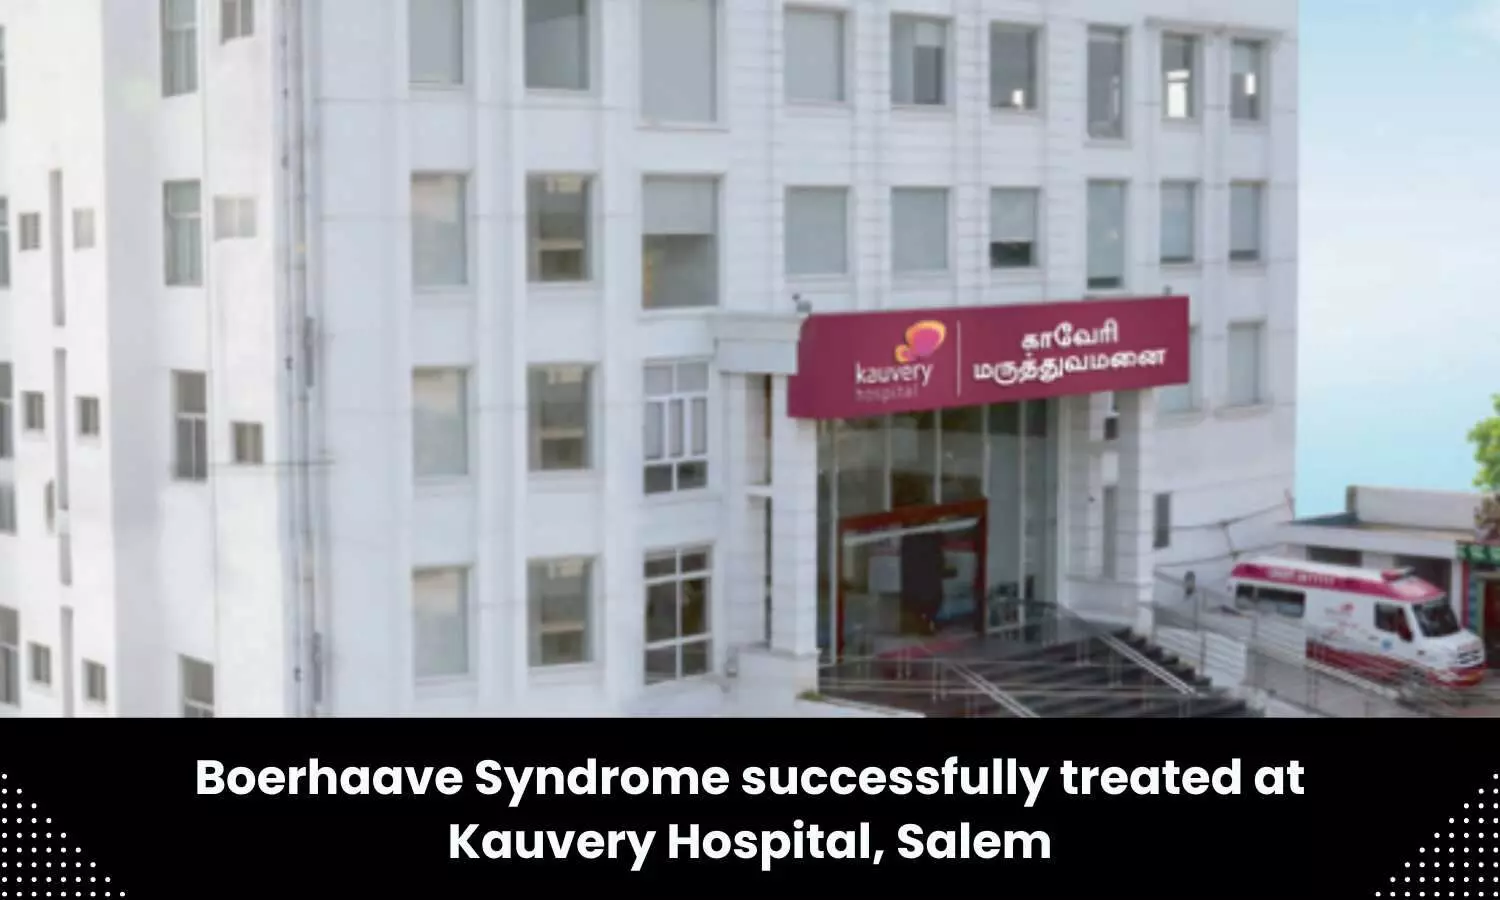 Kauvery Hospital, Salem successfully performs treatment for Boerhaave Syndrome